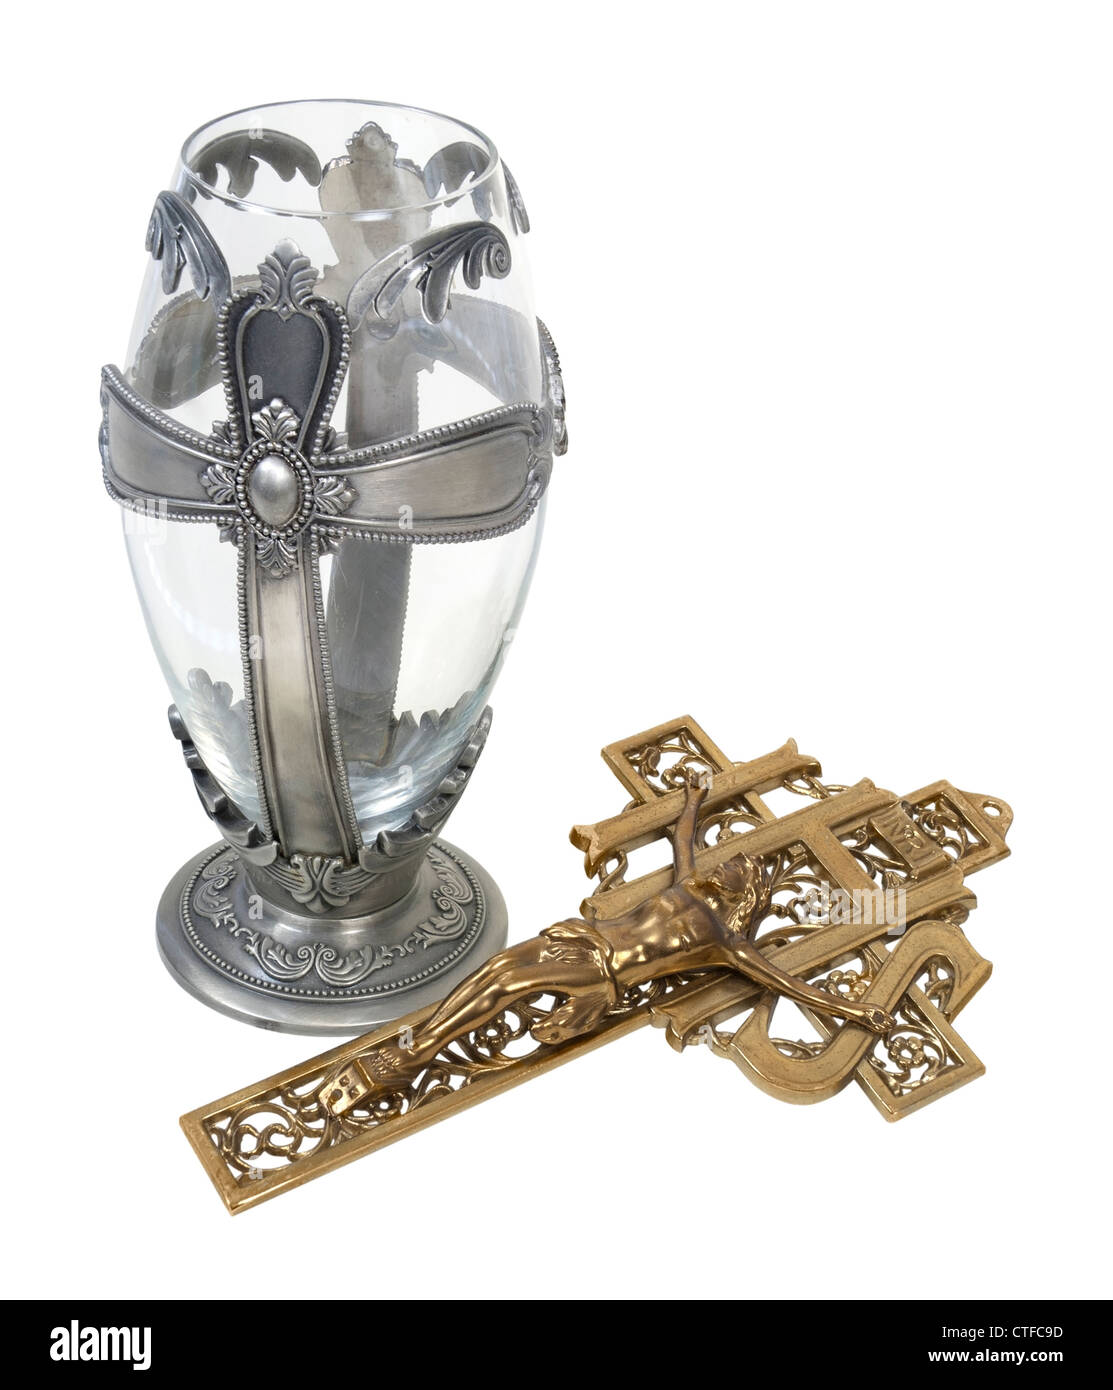 Silver cross chalice and a brass crucifix which are Catholic religious symbols - path included Stock Photo